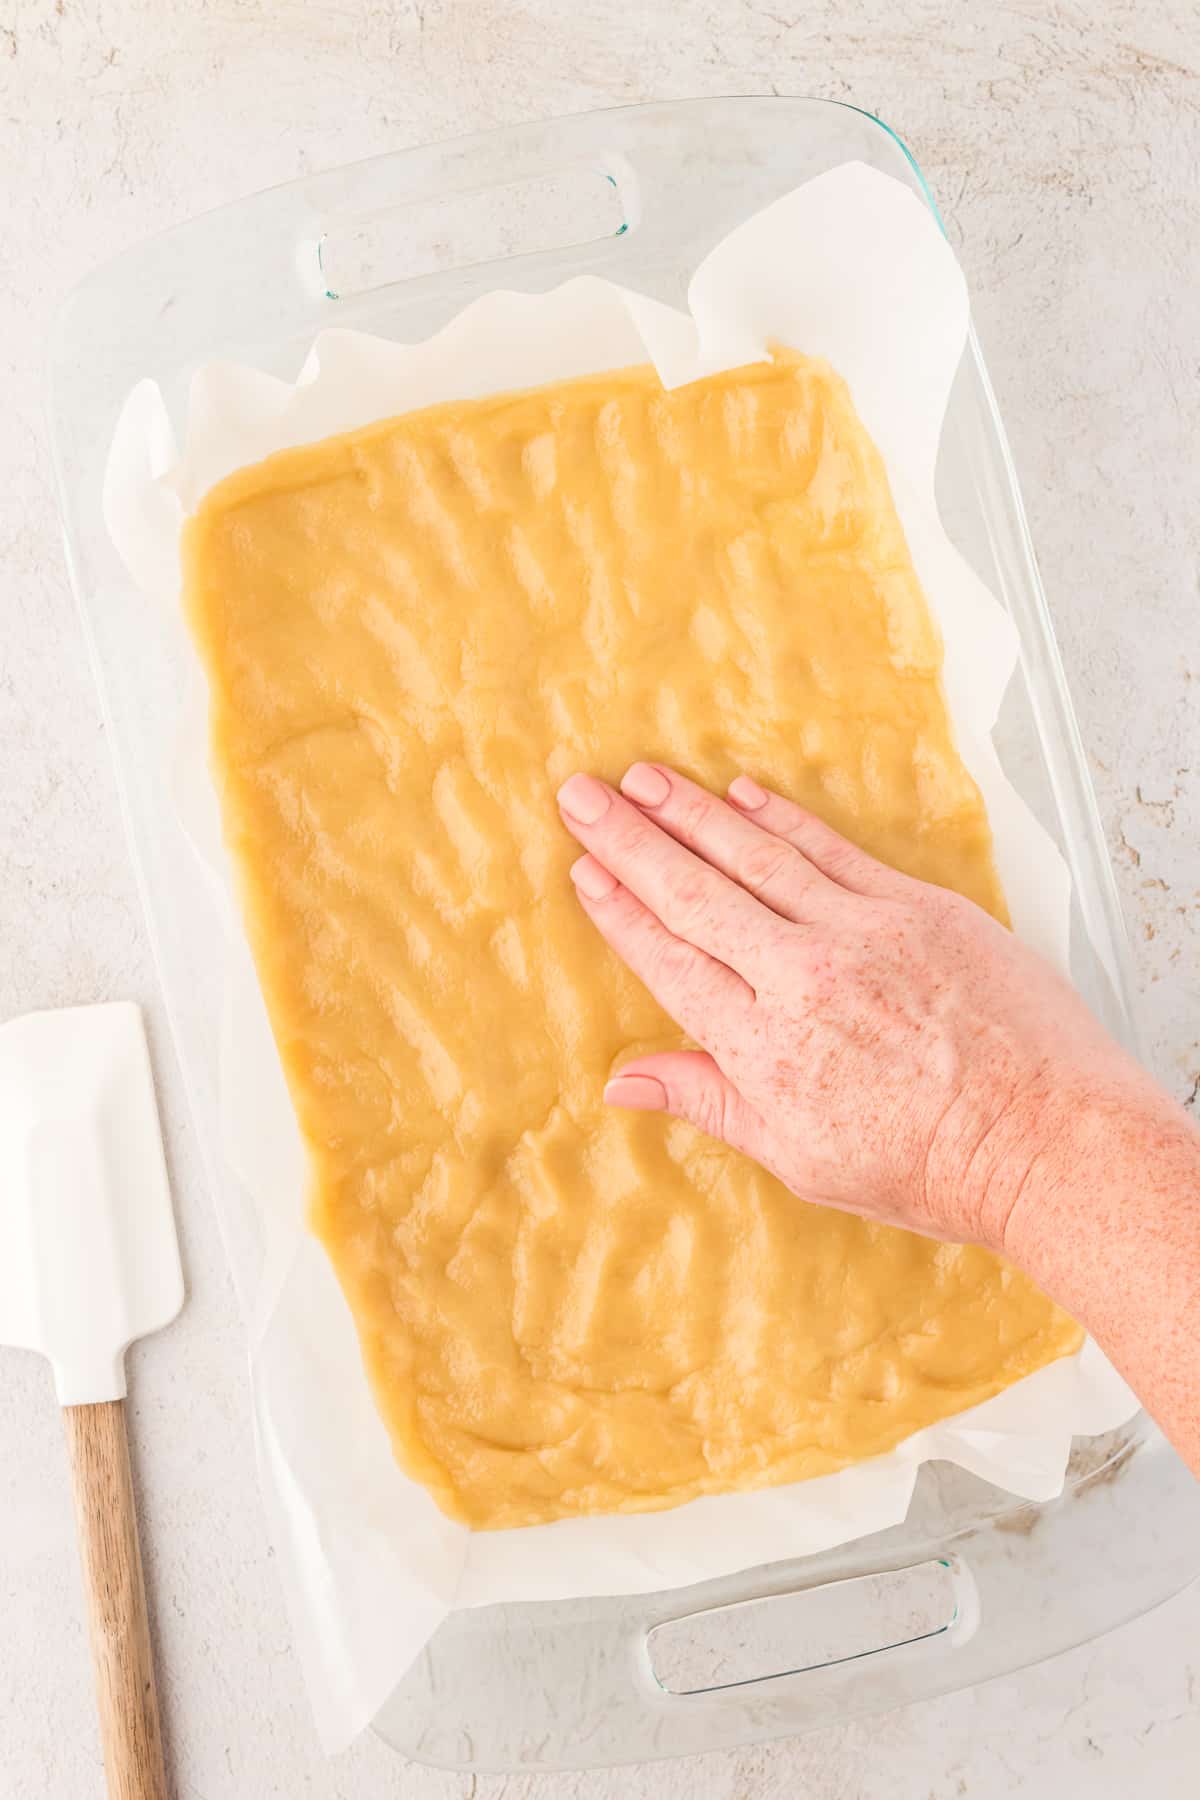 lemon bar dough flattened into a glass pan lined with parchment paper